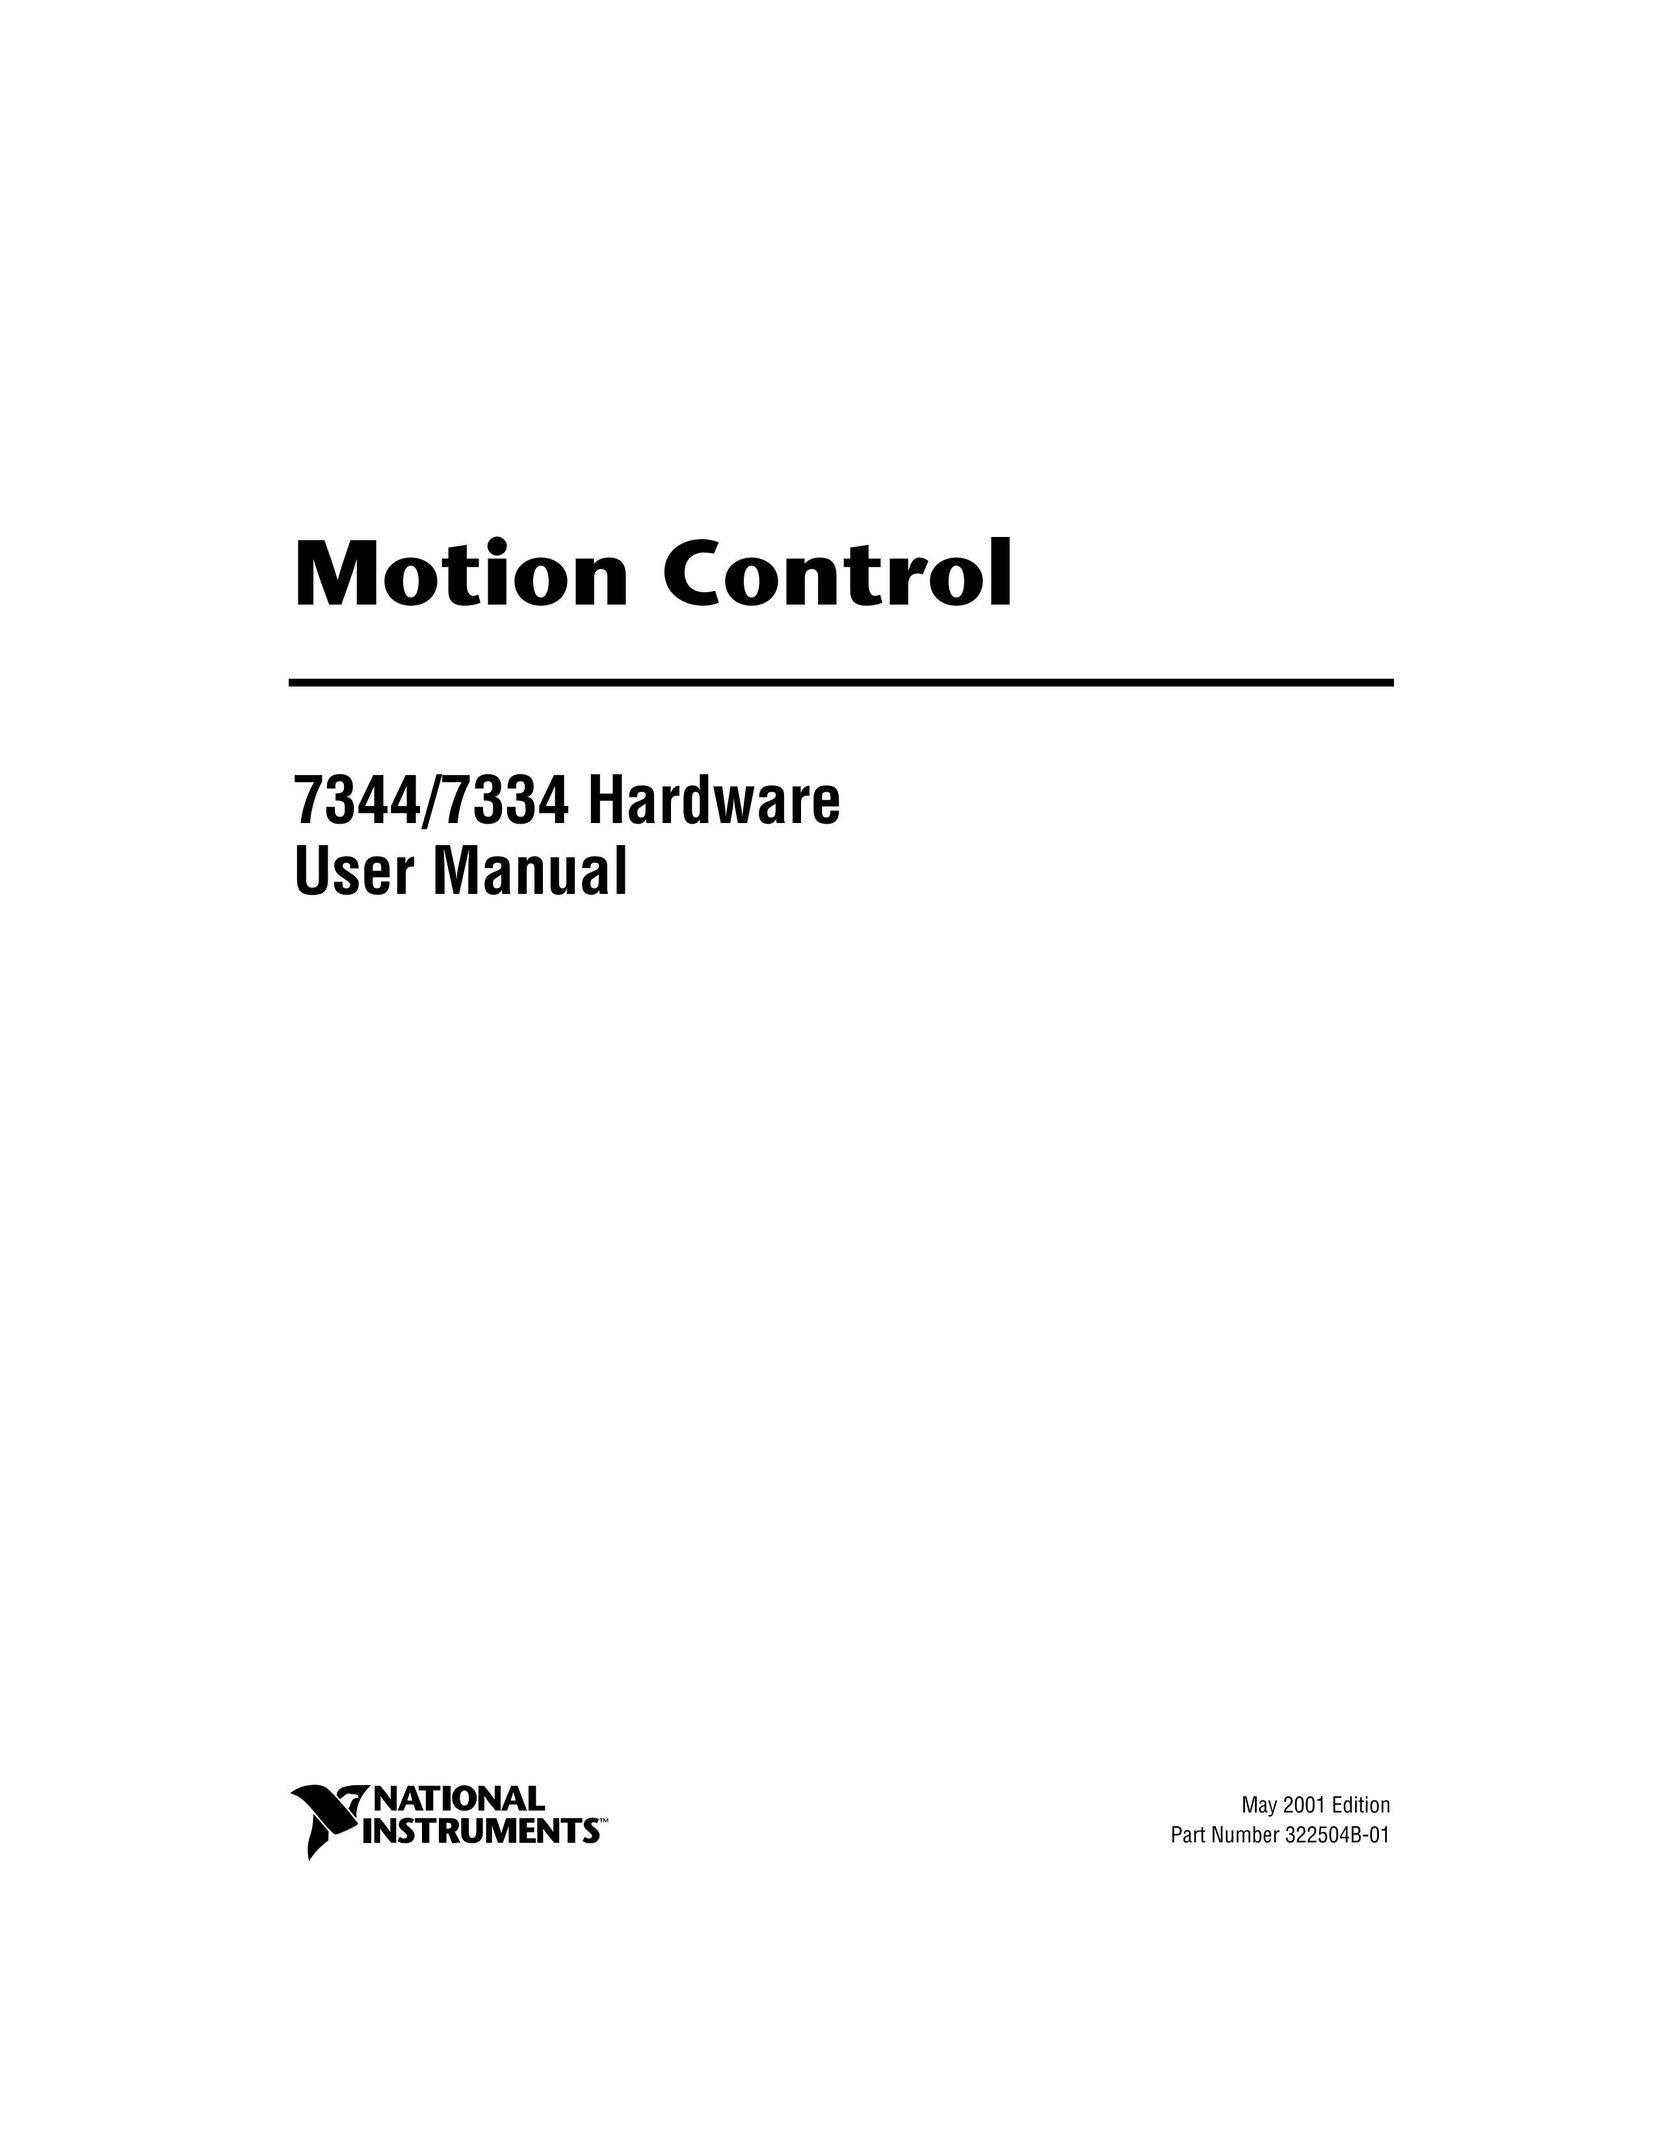 National Instruments 7334 Switch User Manual